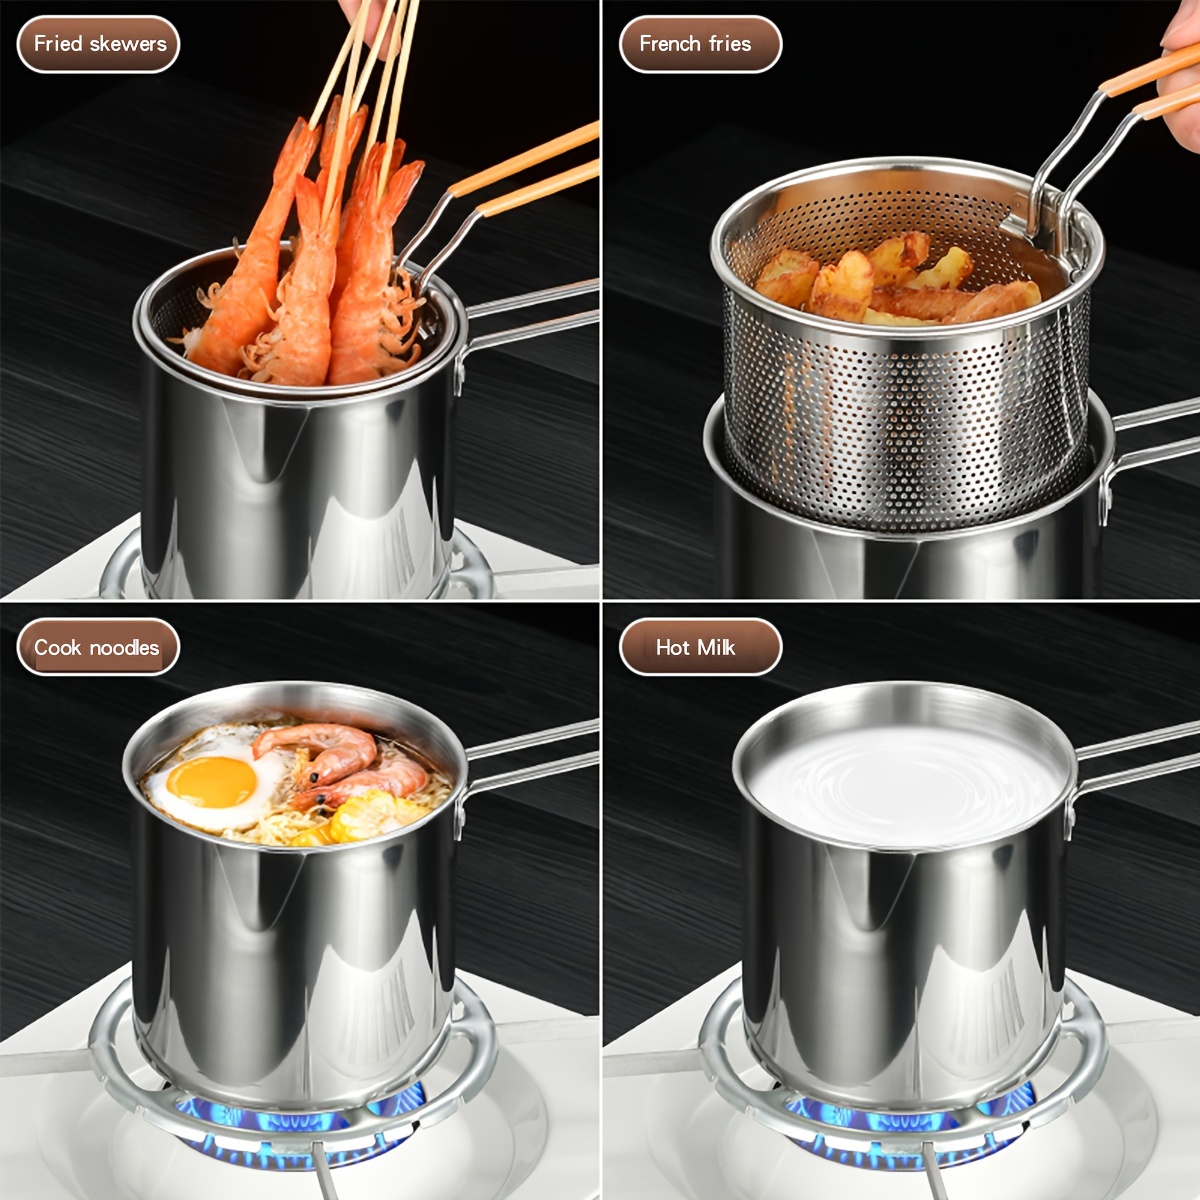 Stainless Steel Deep Fry Basket for Frying Serving Food, Multifunctional  Fryer Basket with Detachable Handle Fryer for Pot Mini Fish Fry Fryer